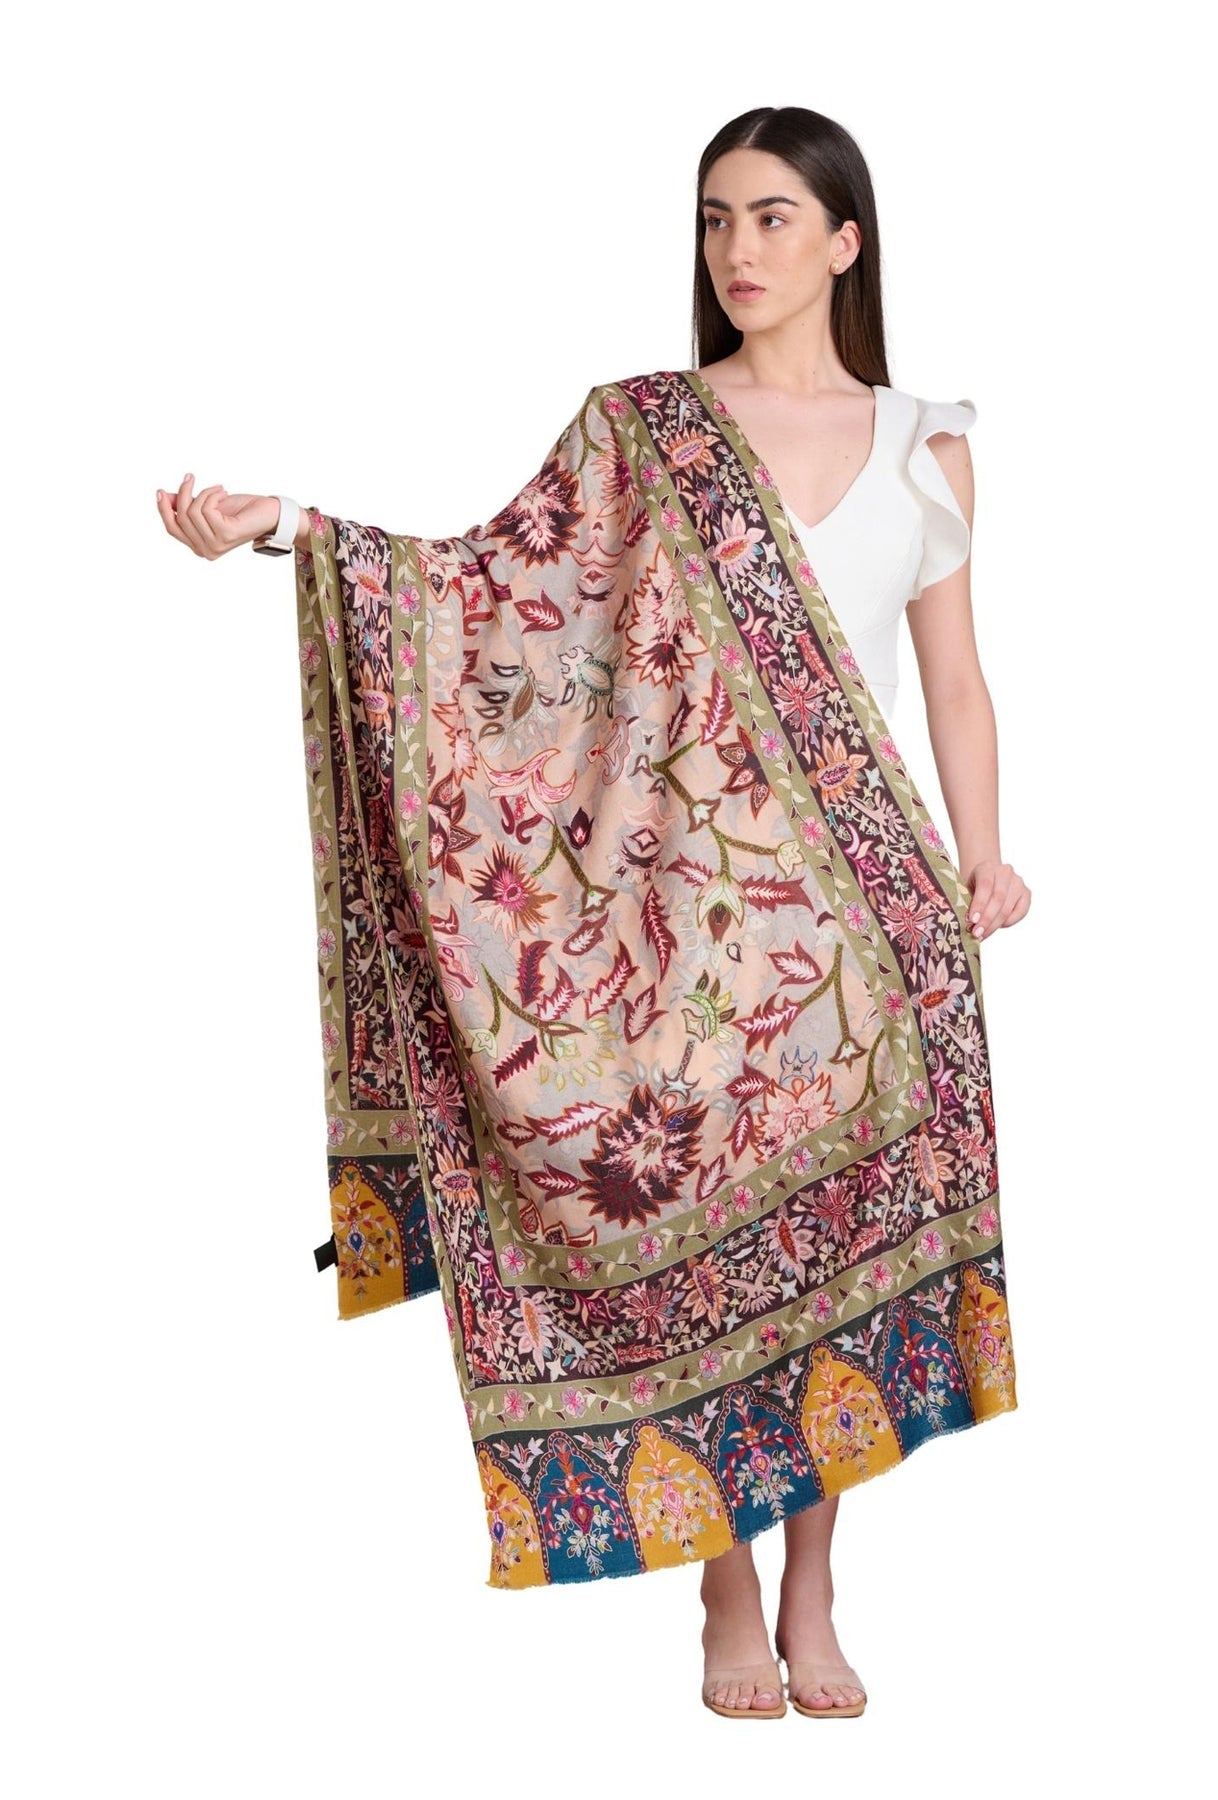 His & Her Gift Set of Men's Wool Kaani Stole and Women's Embroidered Kalamkari Stole